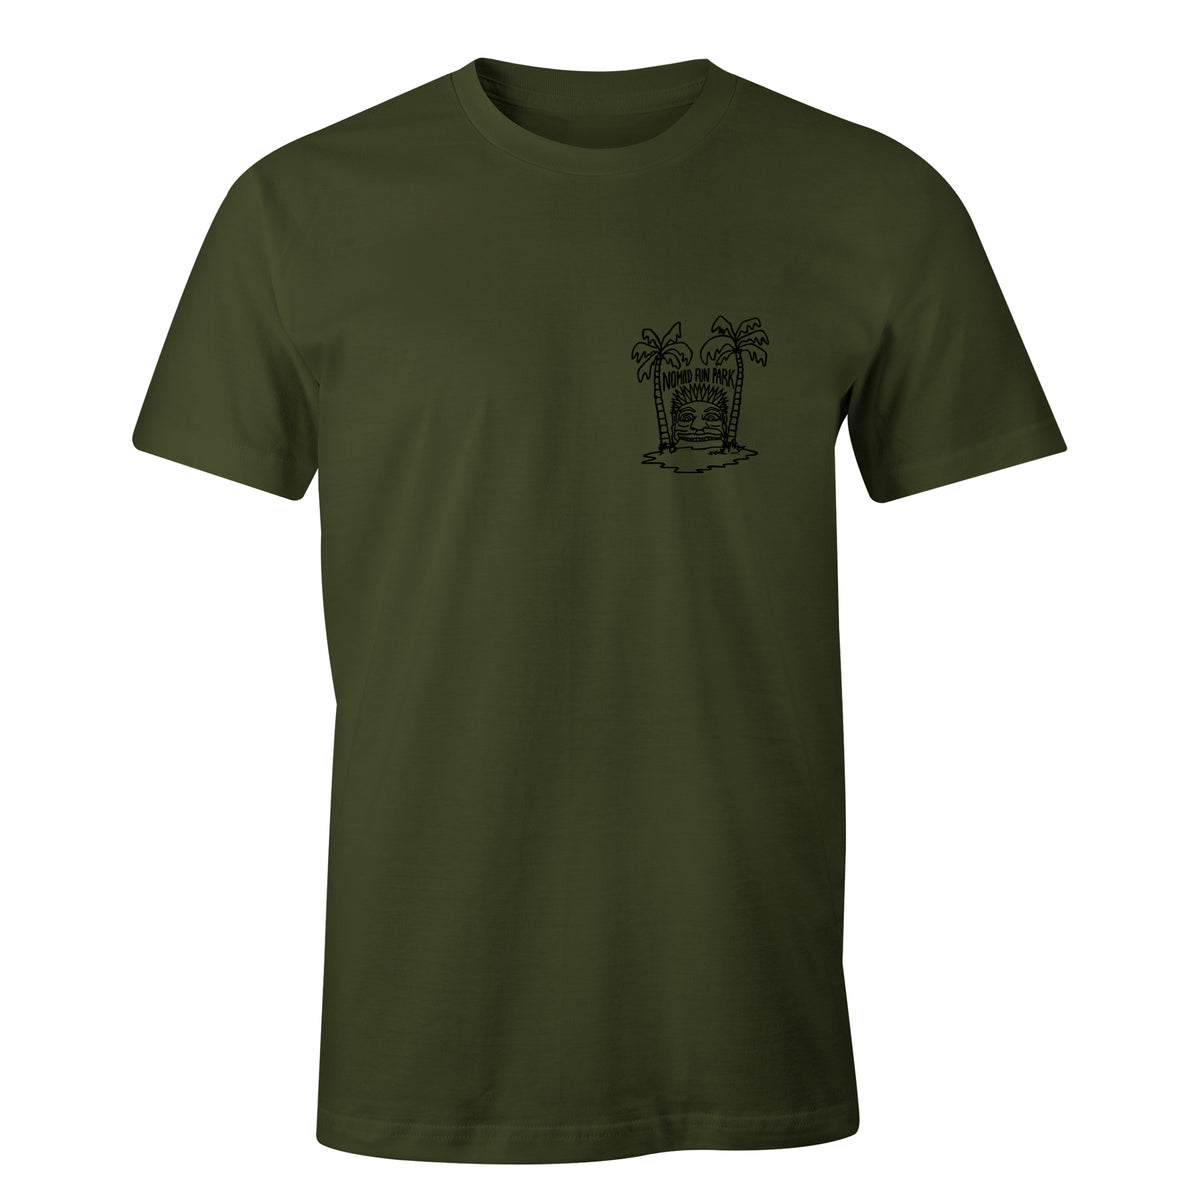 Nomad "FUN PARK" T-Shirt - Army